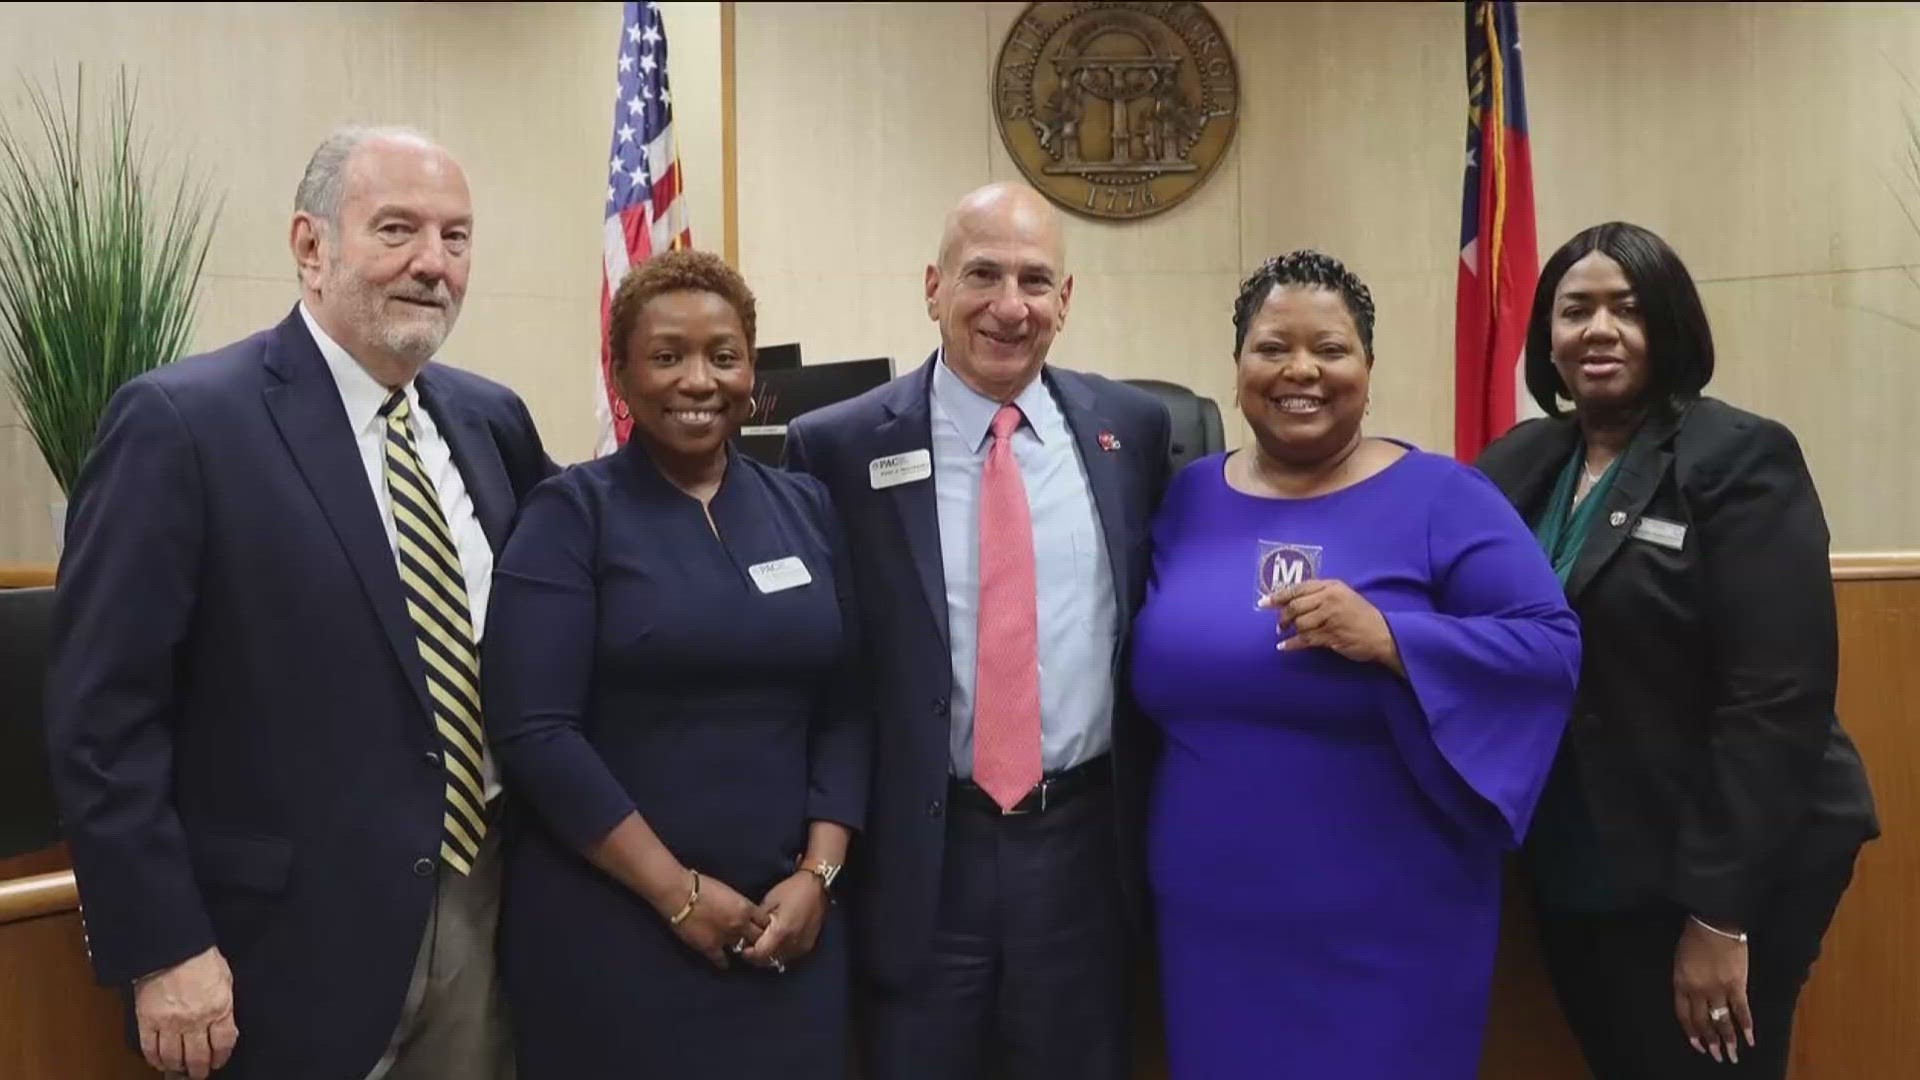 Next week is National Crime Victims' Rights Week. Marsy's Law for Georgia is highlighting local victim advocates.